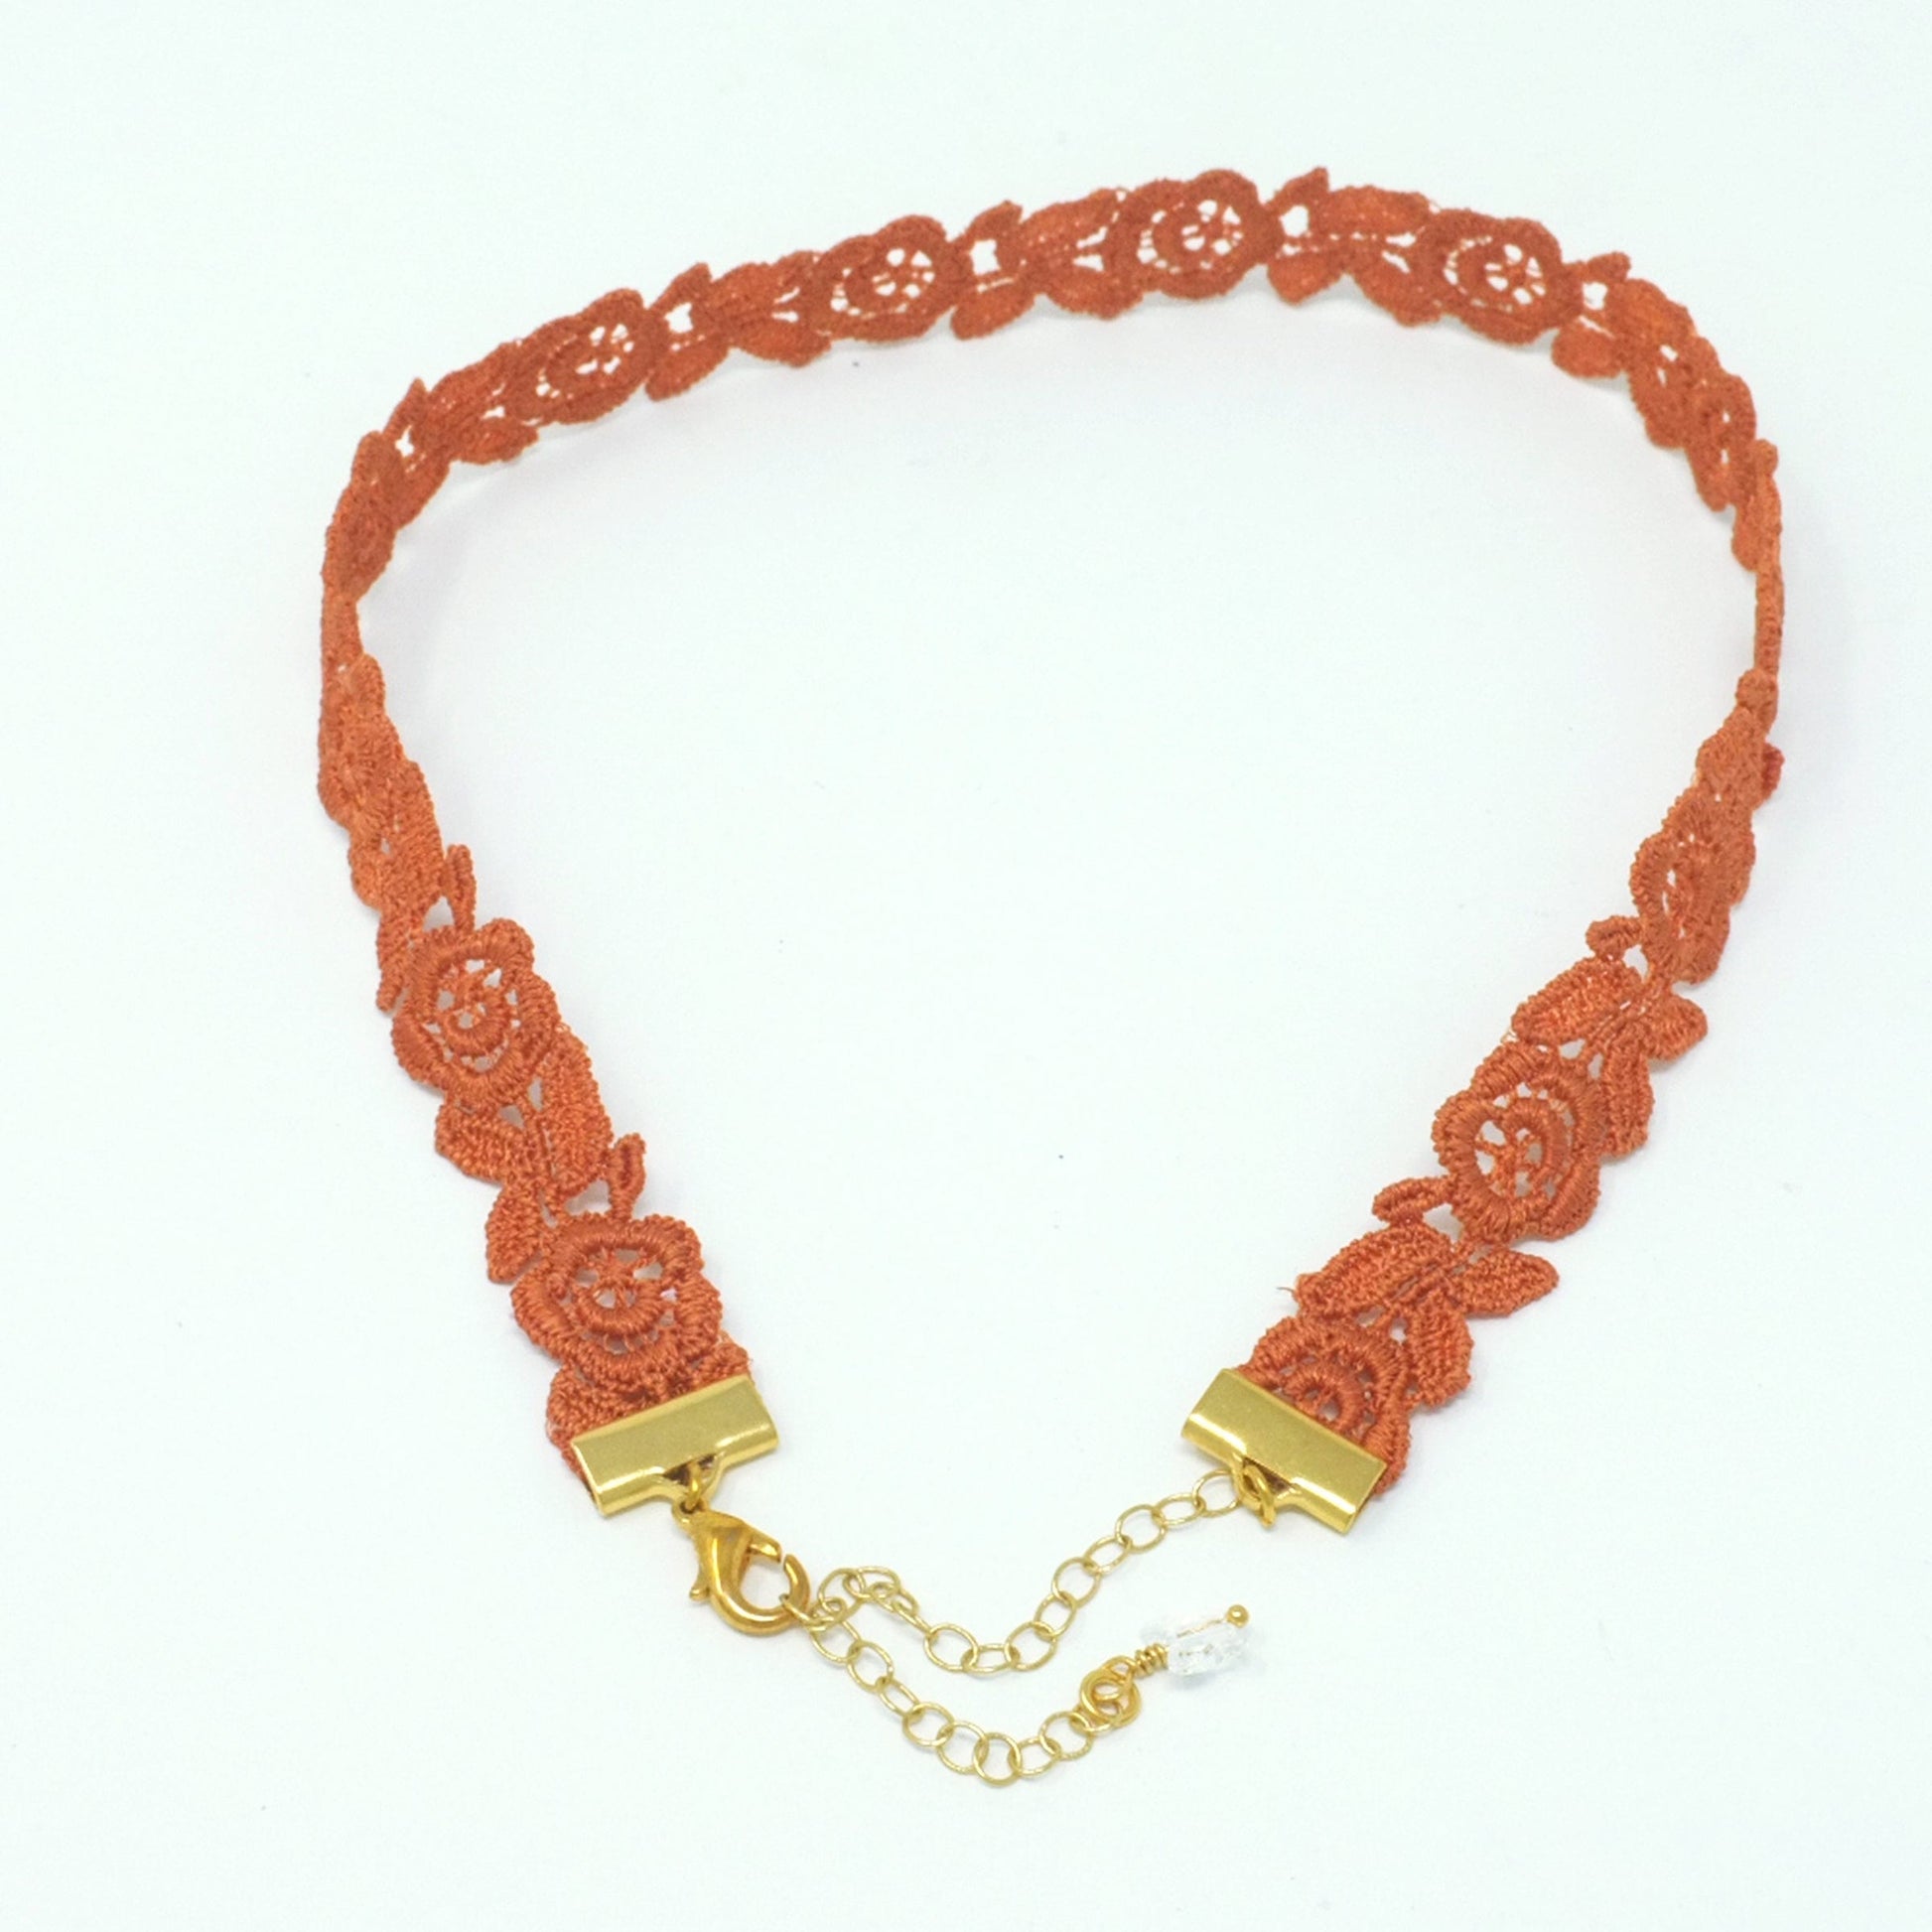 Lace choker with orange roses pattern design and gold clasp closure